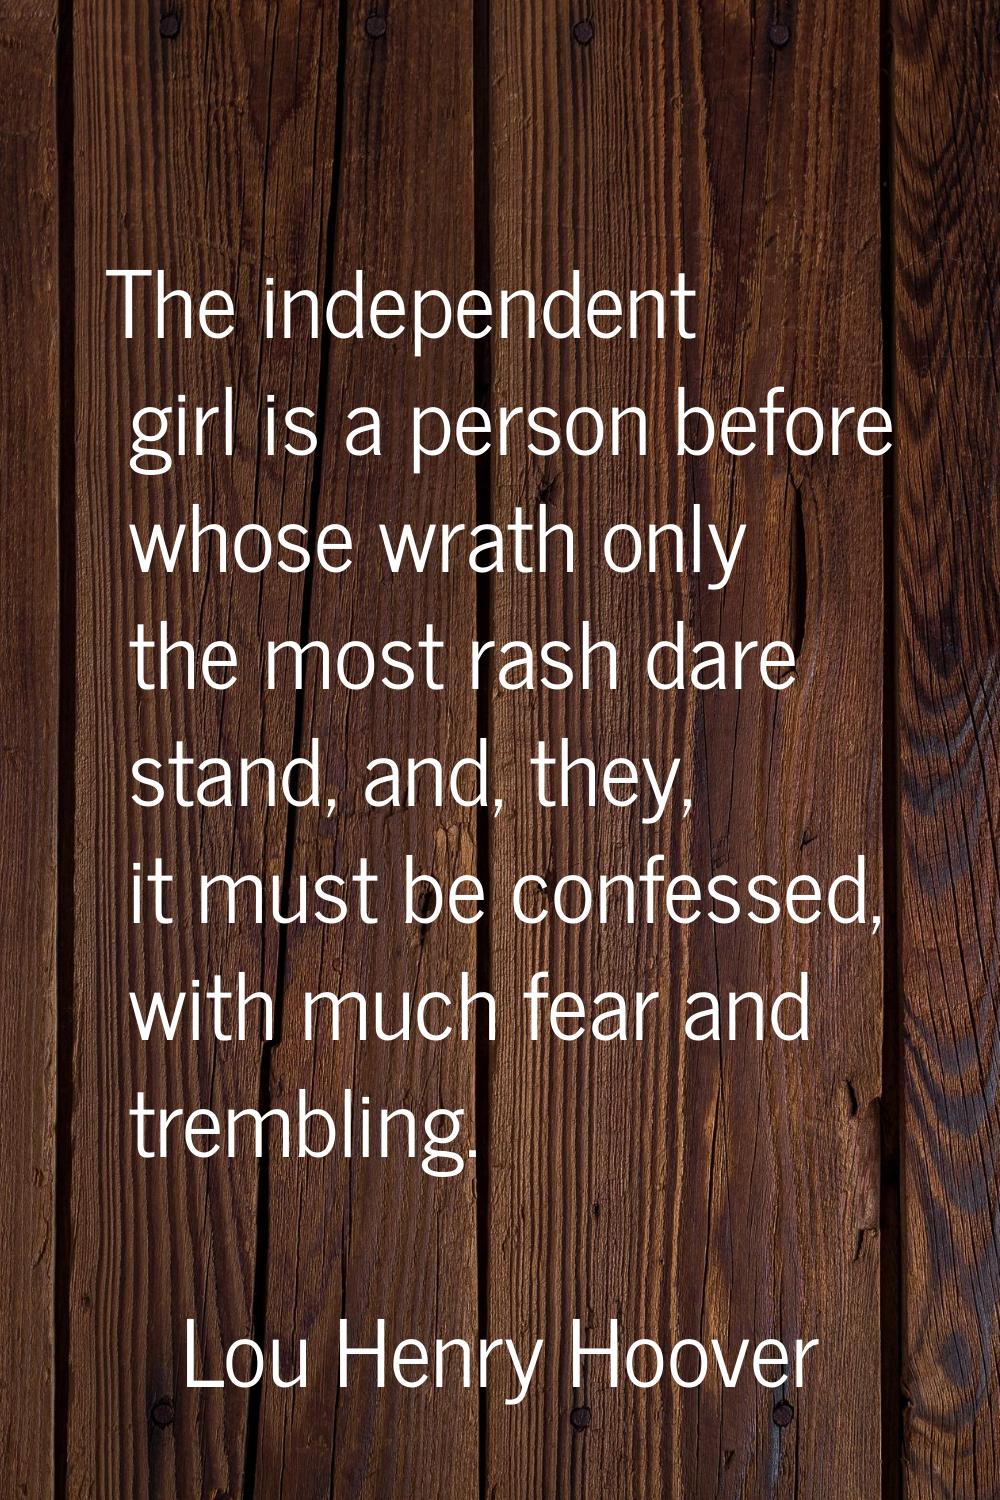 The independent girl is a person before whose wrath only the most rash dare stand, and, they, it mu